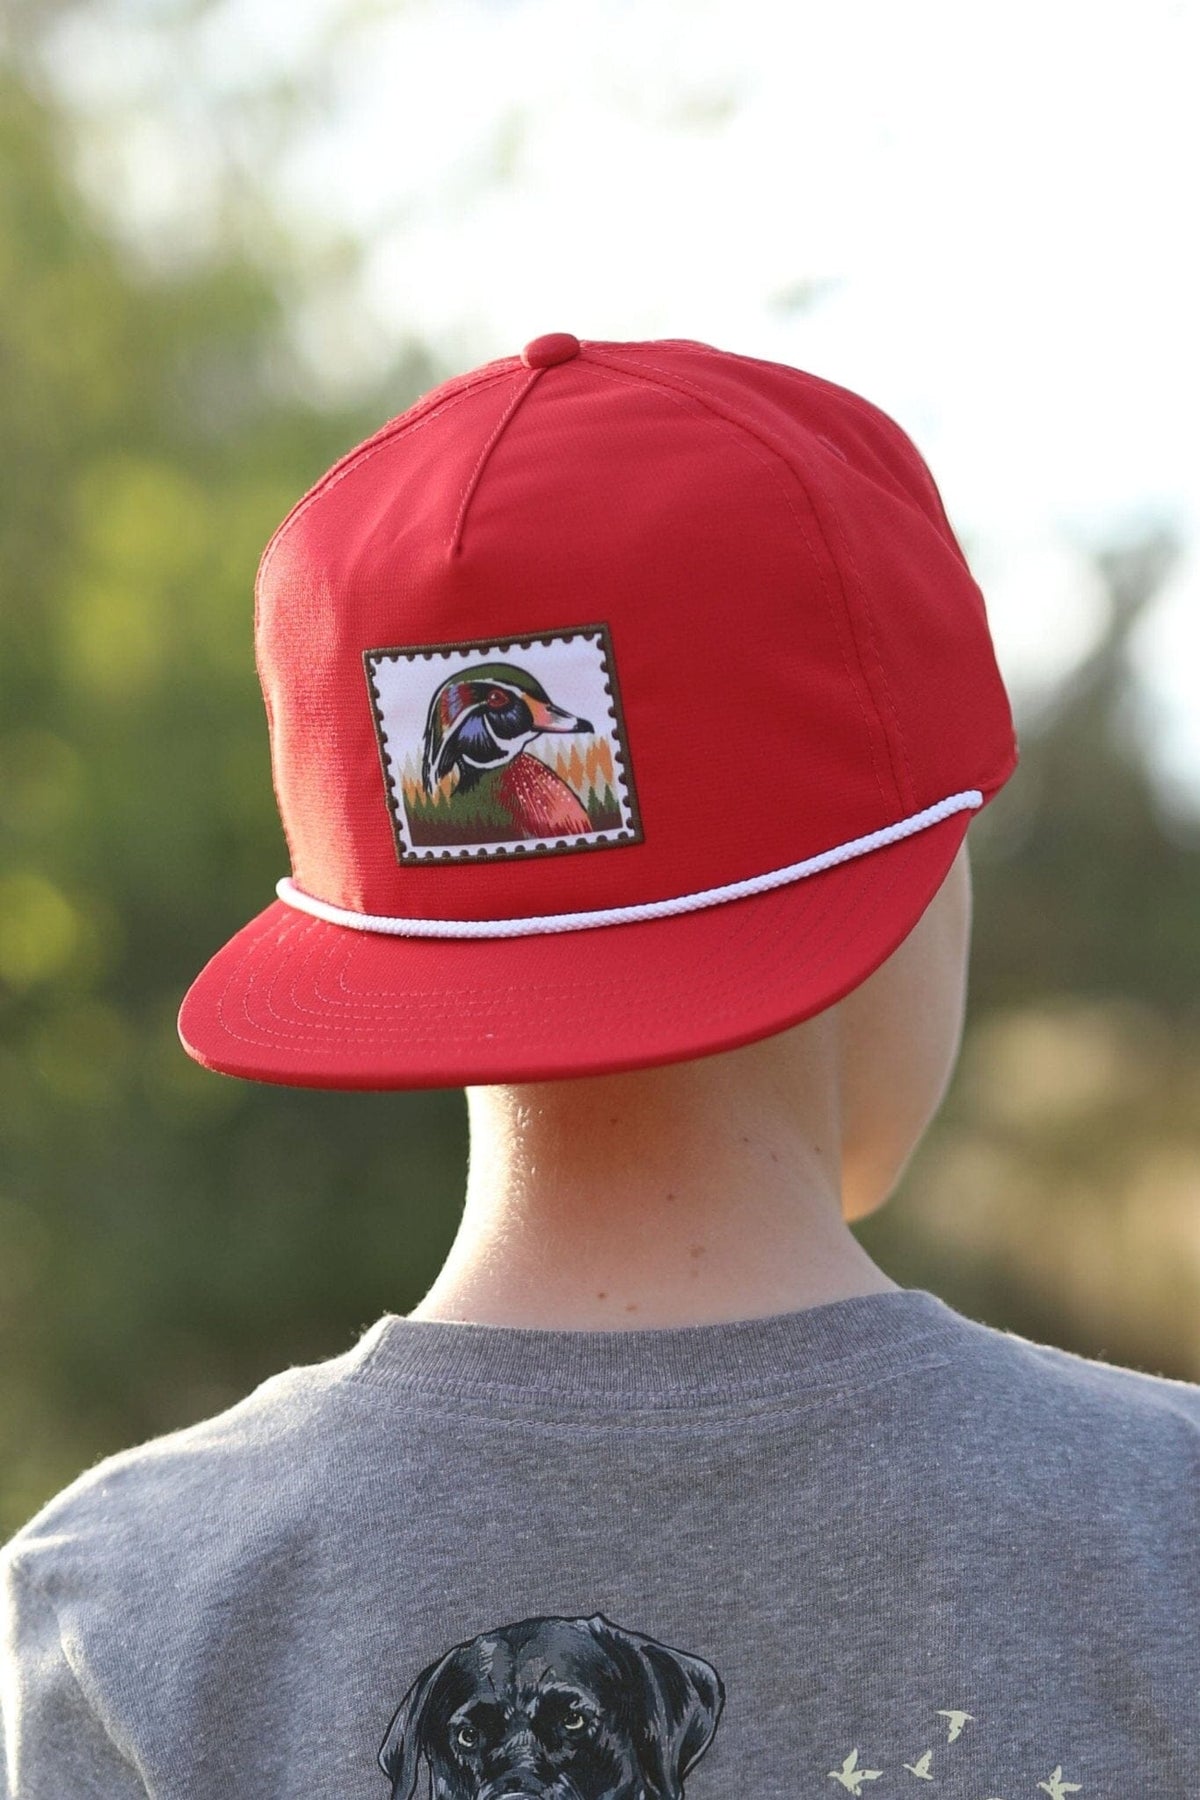 https://cdn.shopify.com/s/files/1/0917/5998/products/youth-cap-red-duck-stamp-768919.jpg?v=1704136812&width=1200